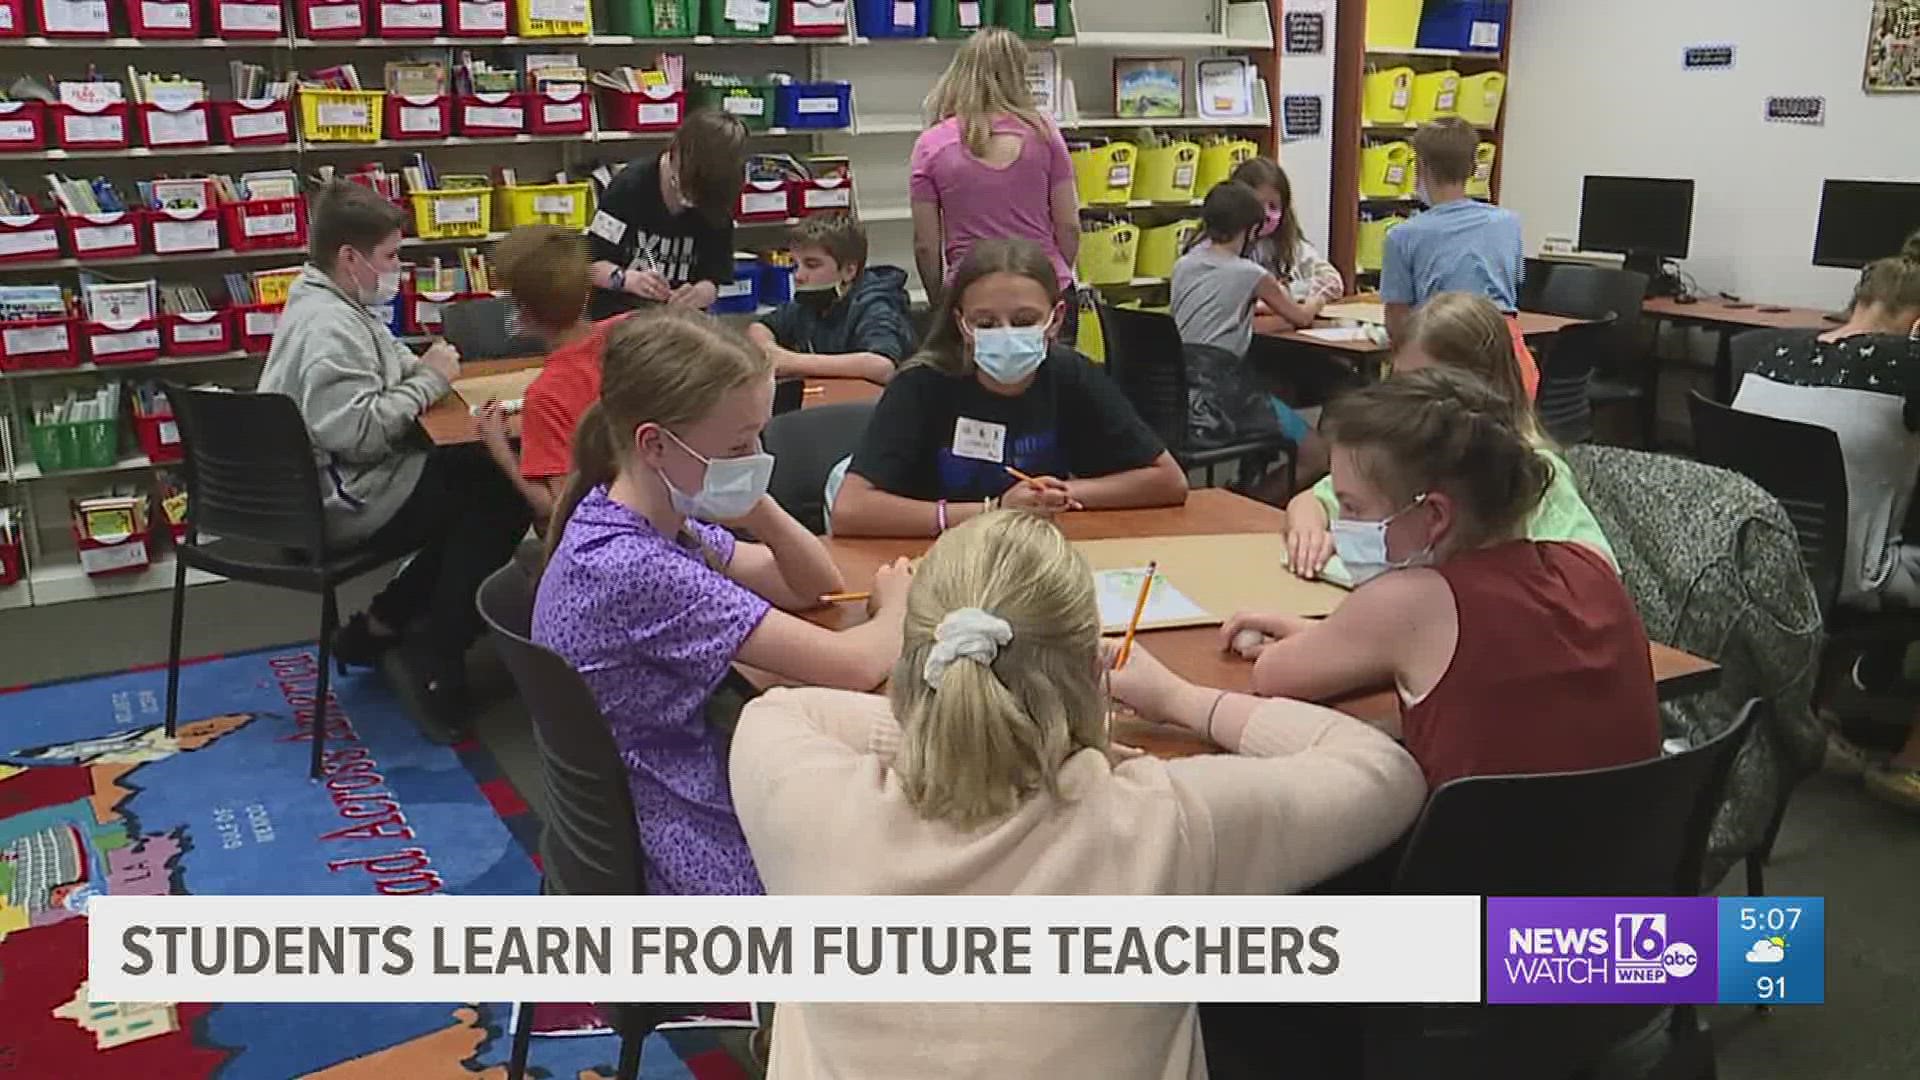 Early education majors at Bloomsburg University are teaching children at STEM camp.